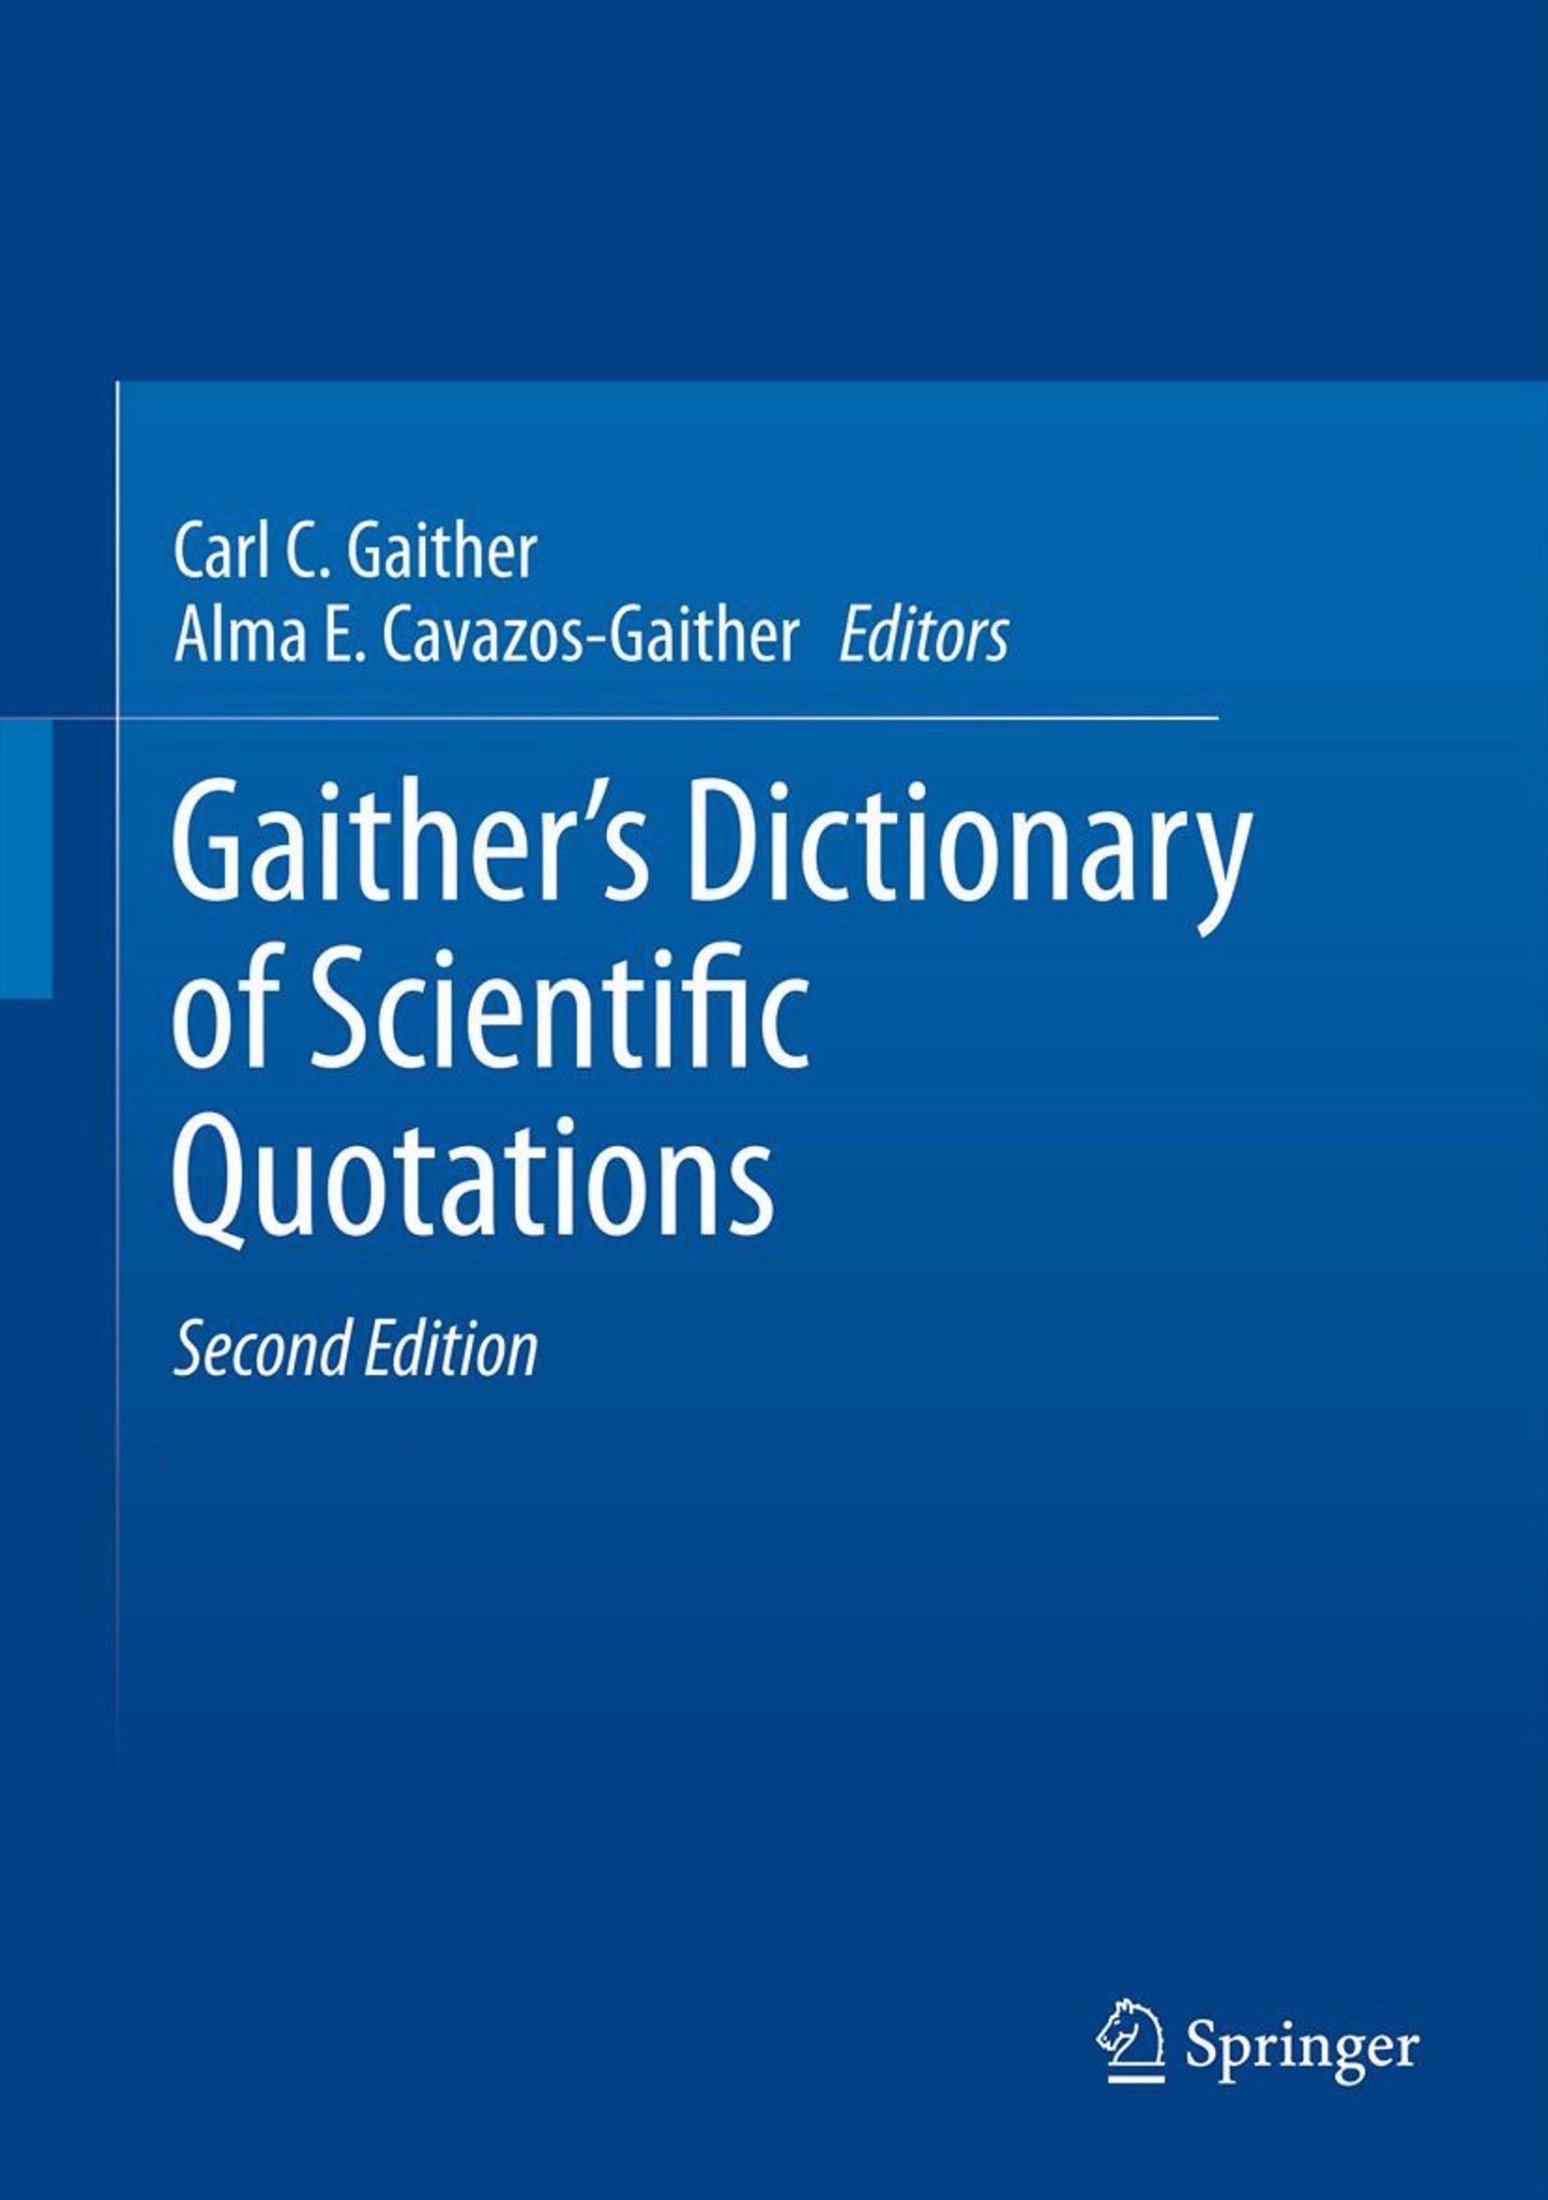 Gaither's Dictionary of Scientific Quotations: A Collection of Approximately 27,000 Quotations Pertaining to Archaeology, Architecture, Astronomy, Biology, Botany, Chemistry, Cosmology, Darwinism, Engineering, Geology, Mathematics, Medicine, Nature, Nursing, Paleontology, Philosophy, Physics, Probability, Science, Statistics, Technology, Theory, Universe, and Zoology